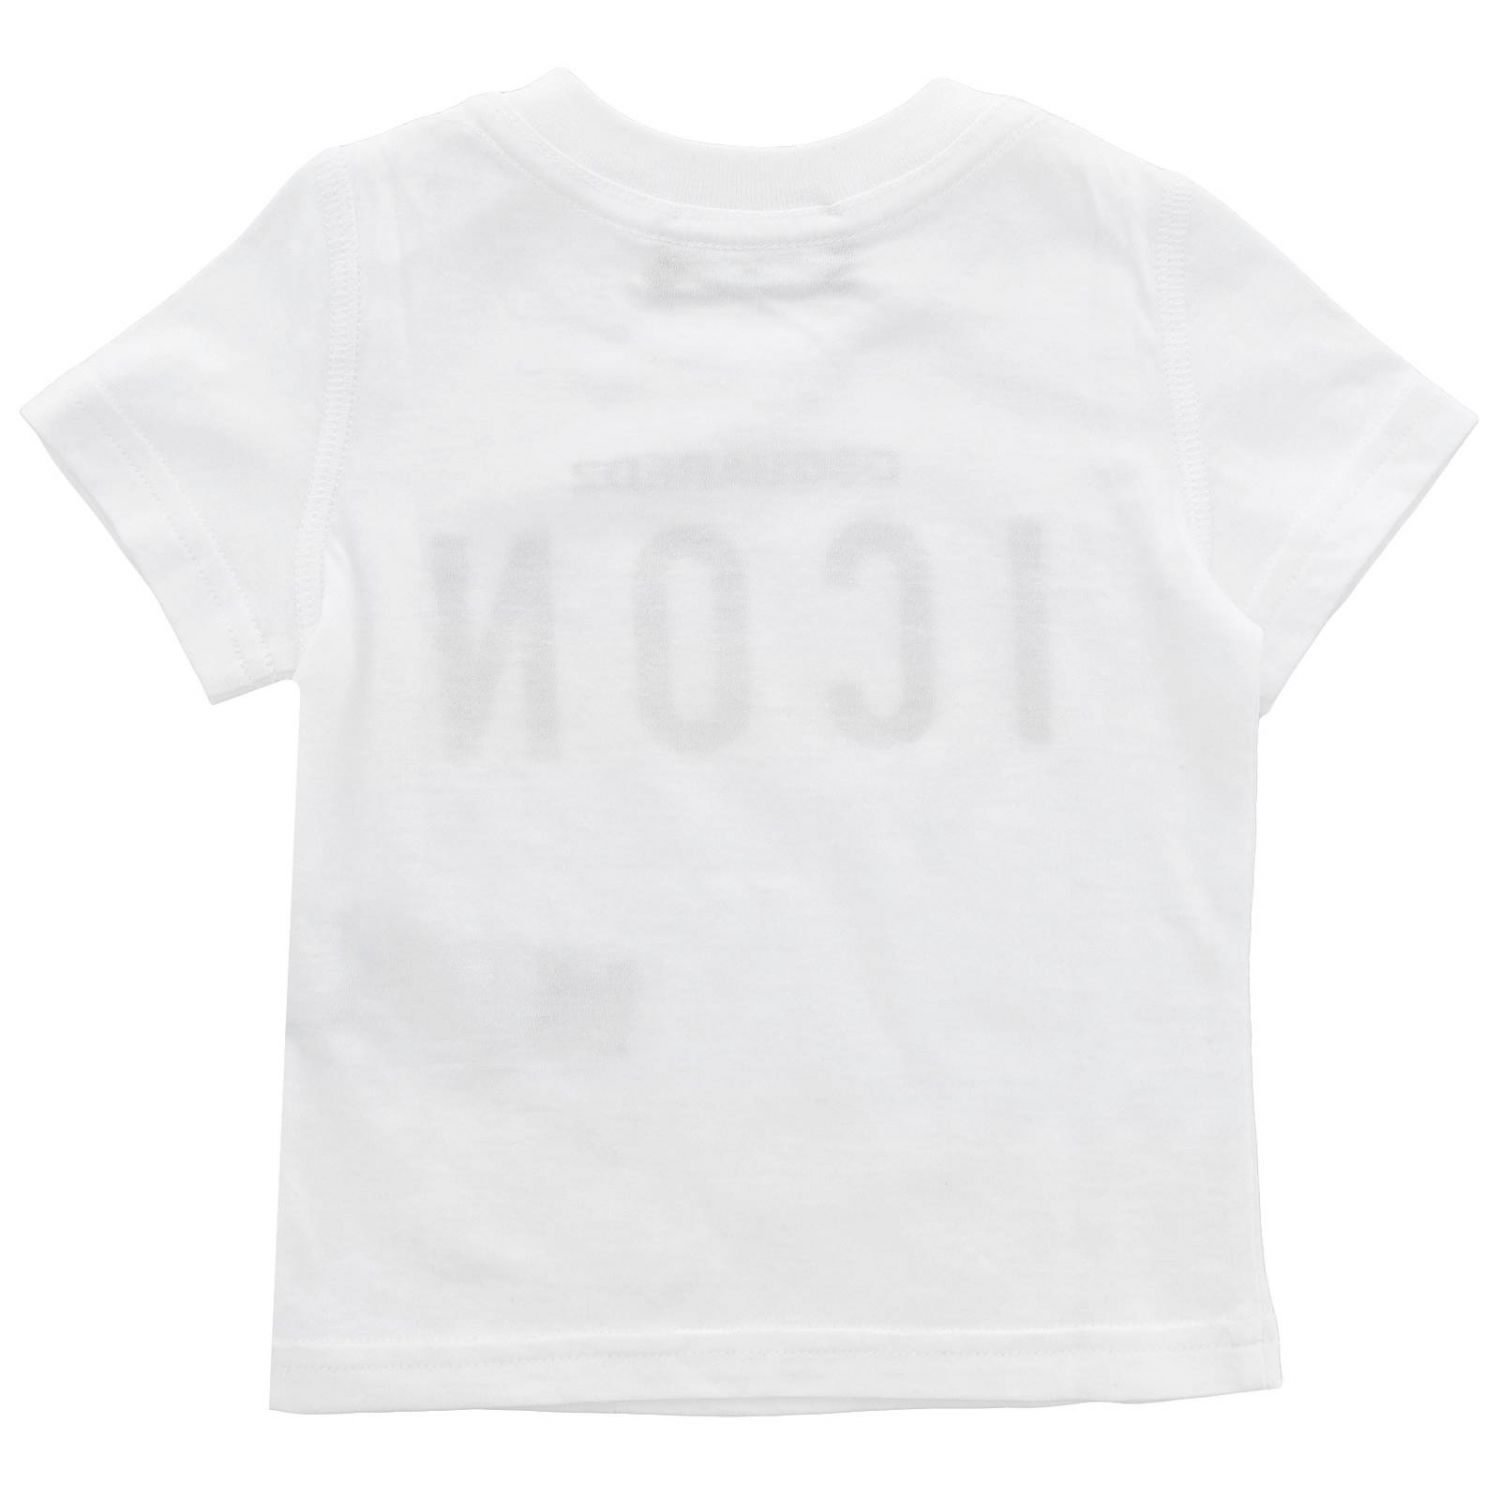 Dsquared2 Junior Outlet: t-shirt for baby - White | Dsquared2 Junior t ...